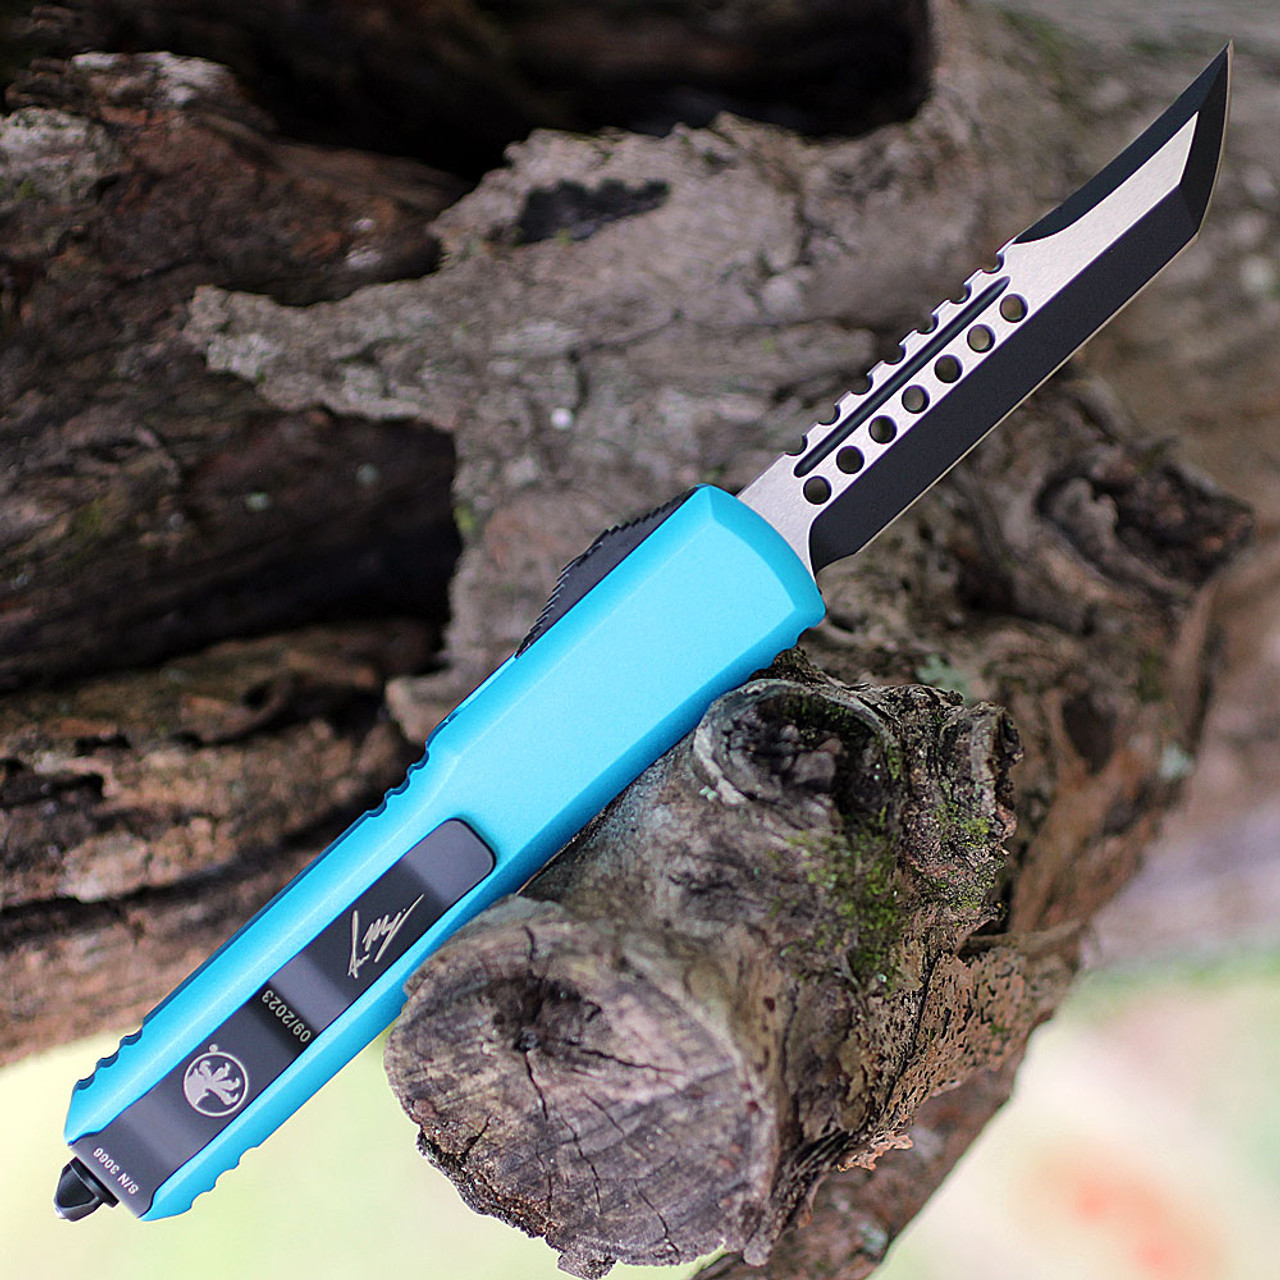 Microtech Ultratech Hellhound Signature Series Double Action OTF (119-1 TQS) 3.3" Premium Steel Tanto Two-Toned Plain Blade, Teal Anodized Aluminum Handle with Glass Breaker